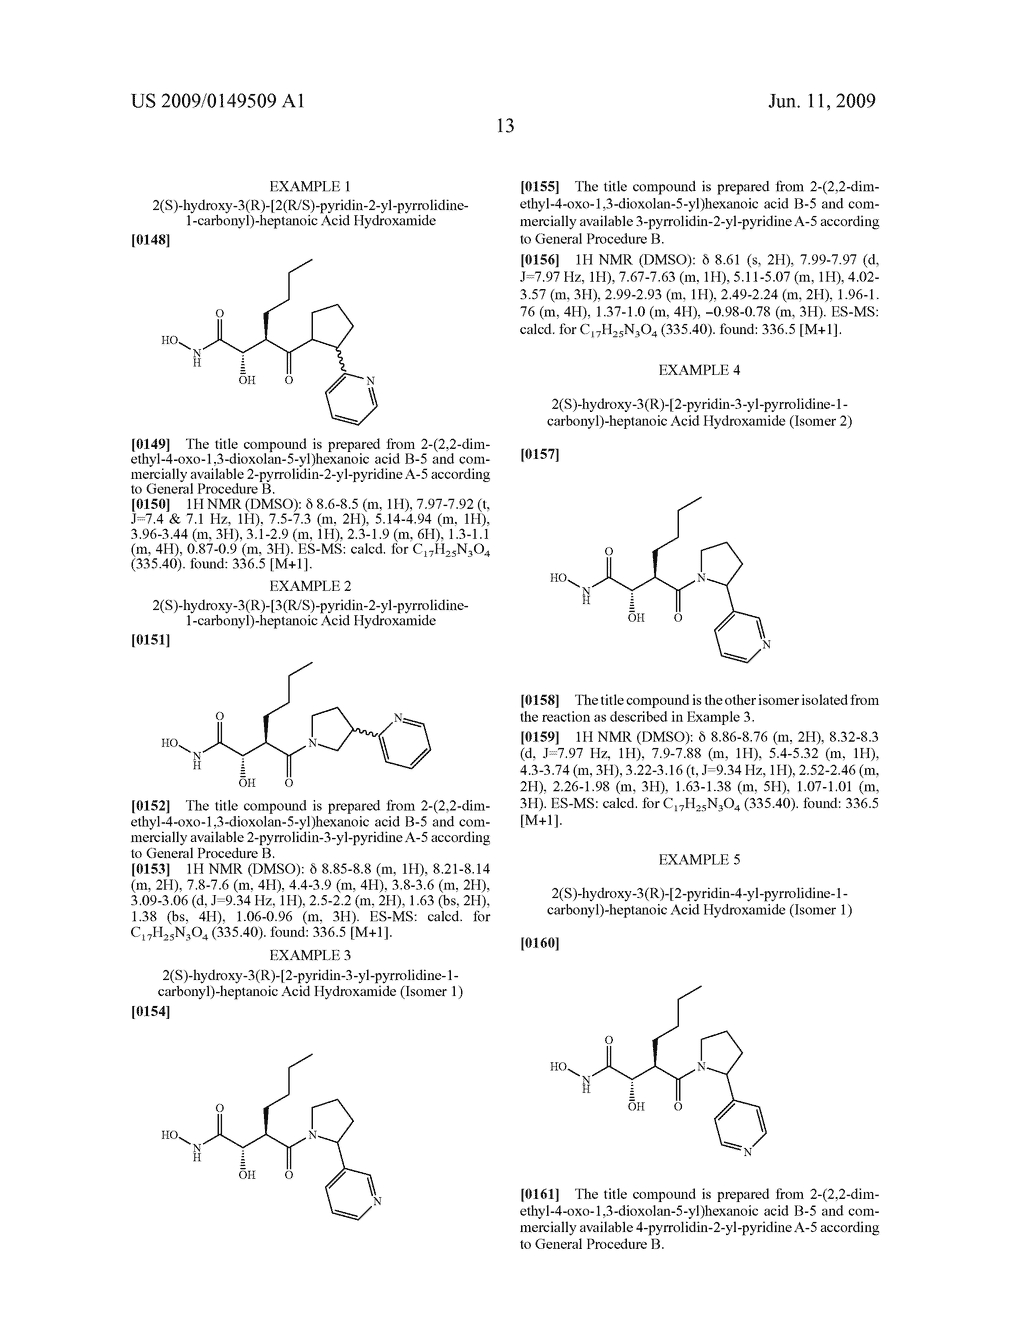 NOVEL PYRROLIDINE BICYCLIC COMPOUNDS AND ITS DERIVATIVES, COMPOSITIONS AND METHODS OF USE - diagram, schematic, and image 14